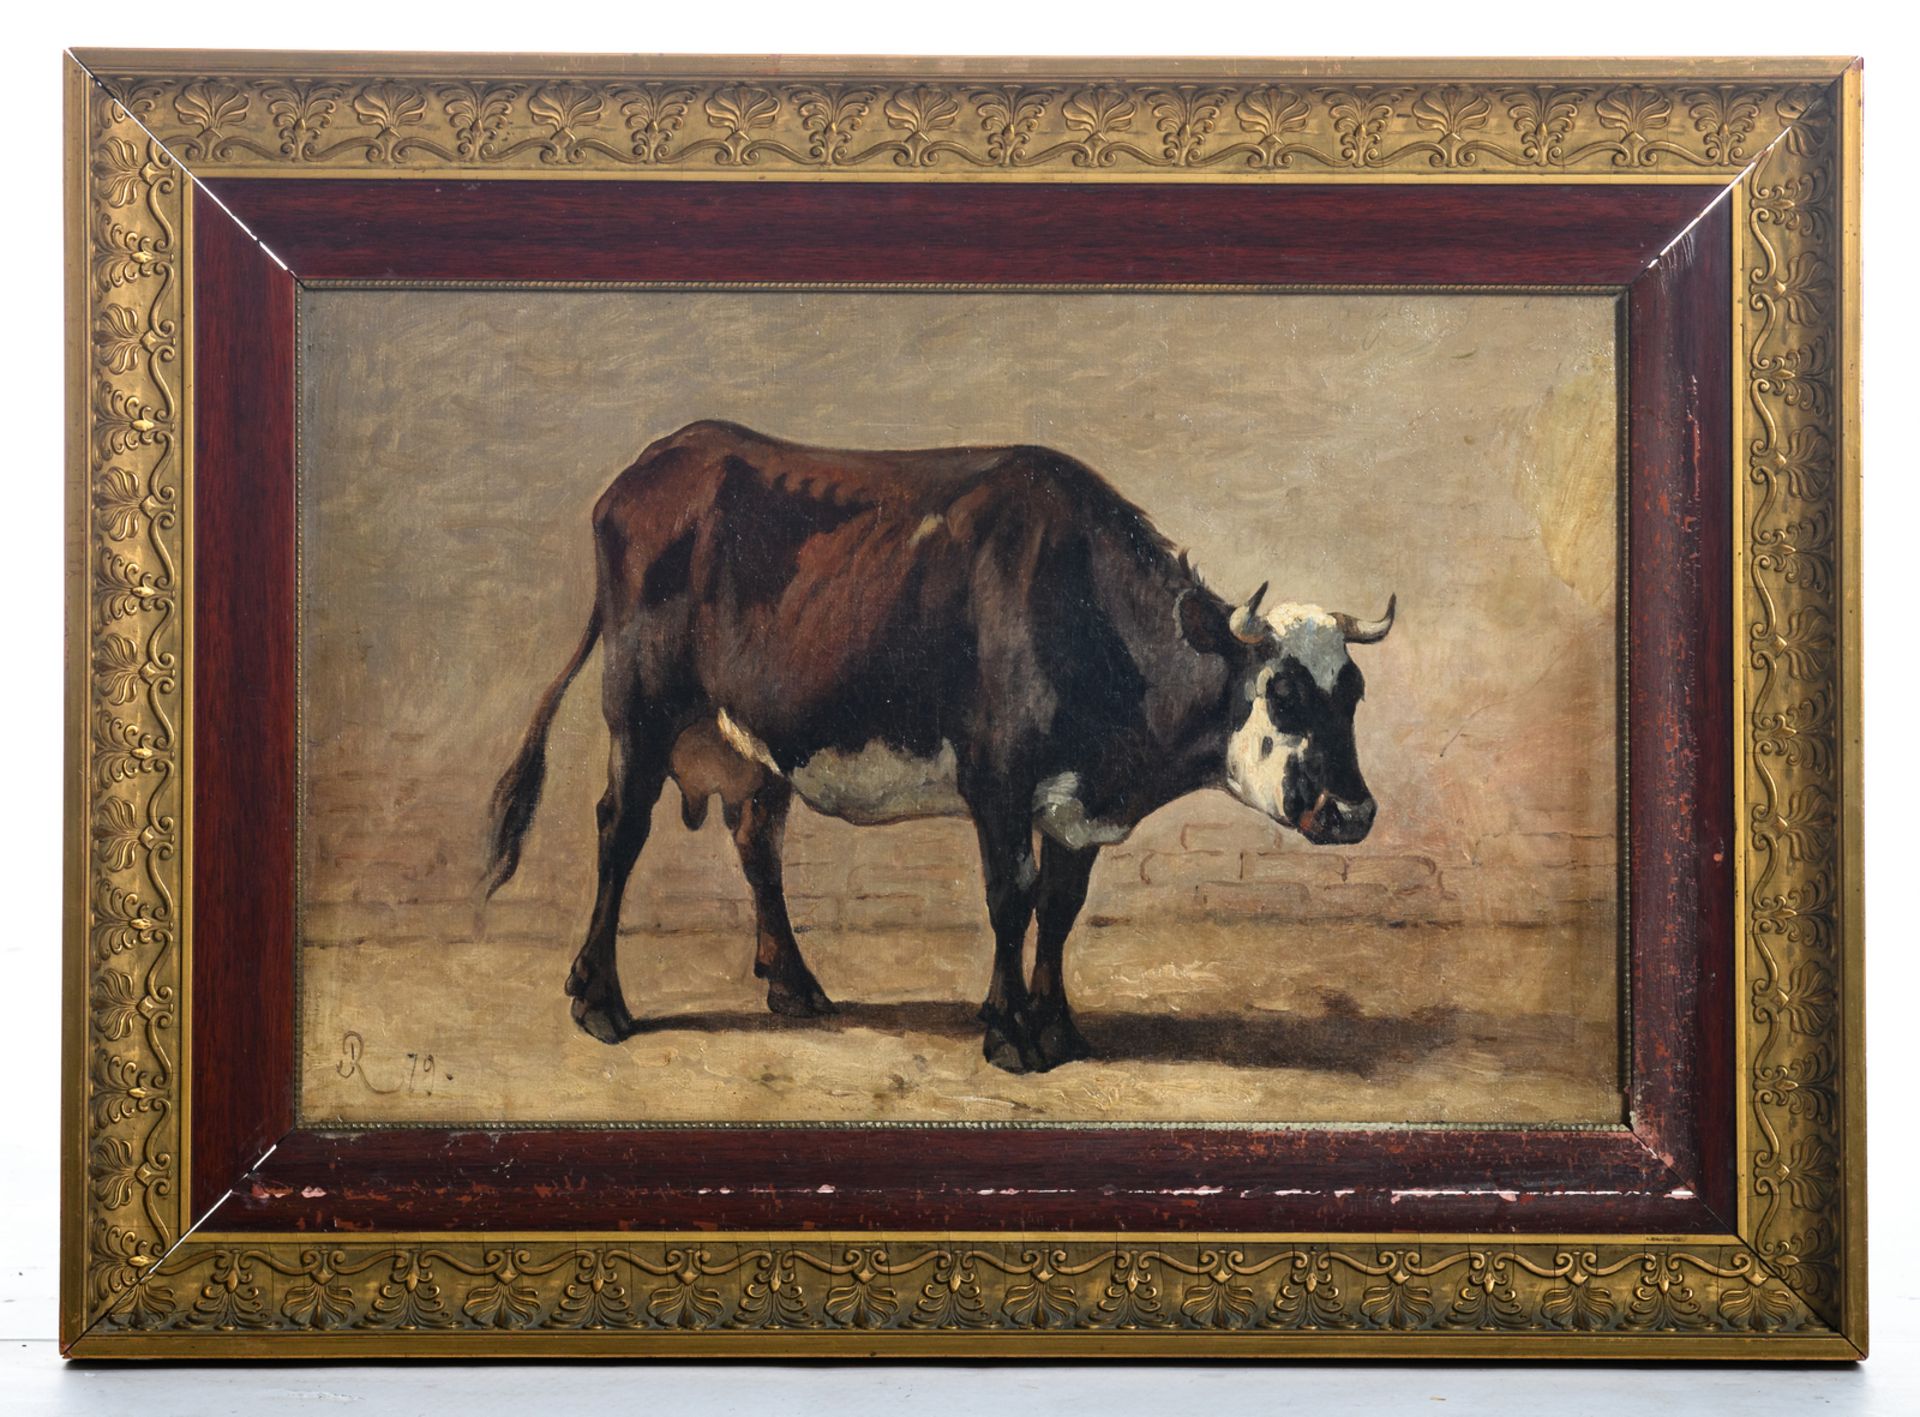 Monogrammed (J.R.?), a portrait of a price cow, oil on canvas, dated (18)79, 32,5 x 50 cm - Image 2 of 4